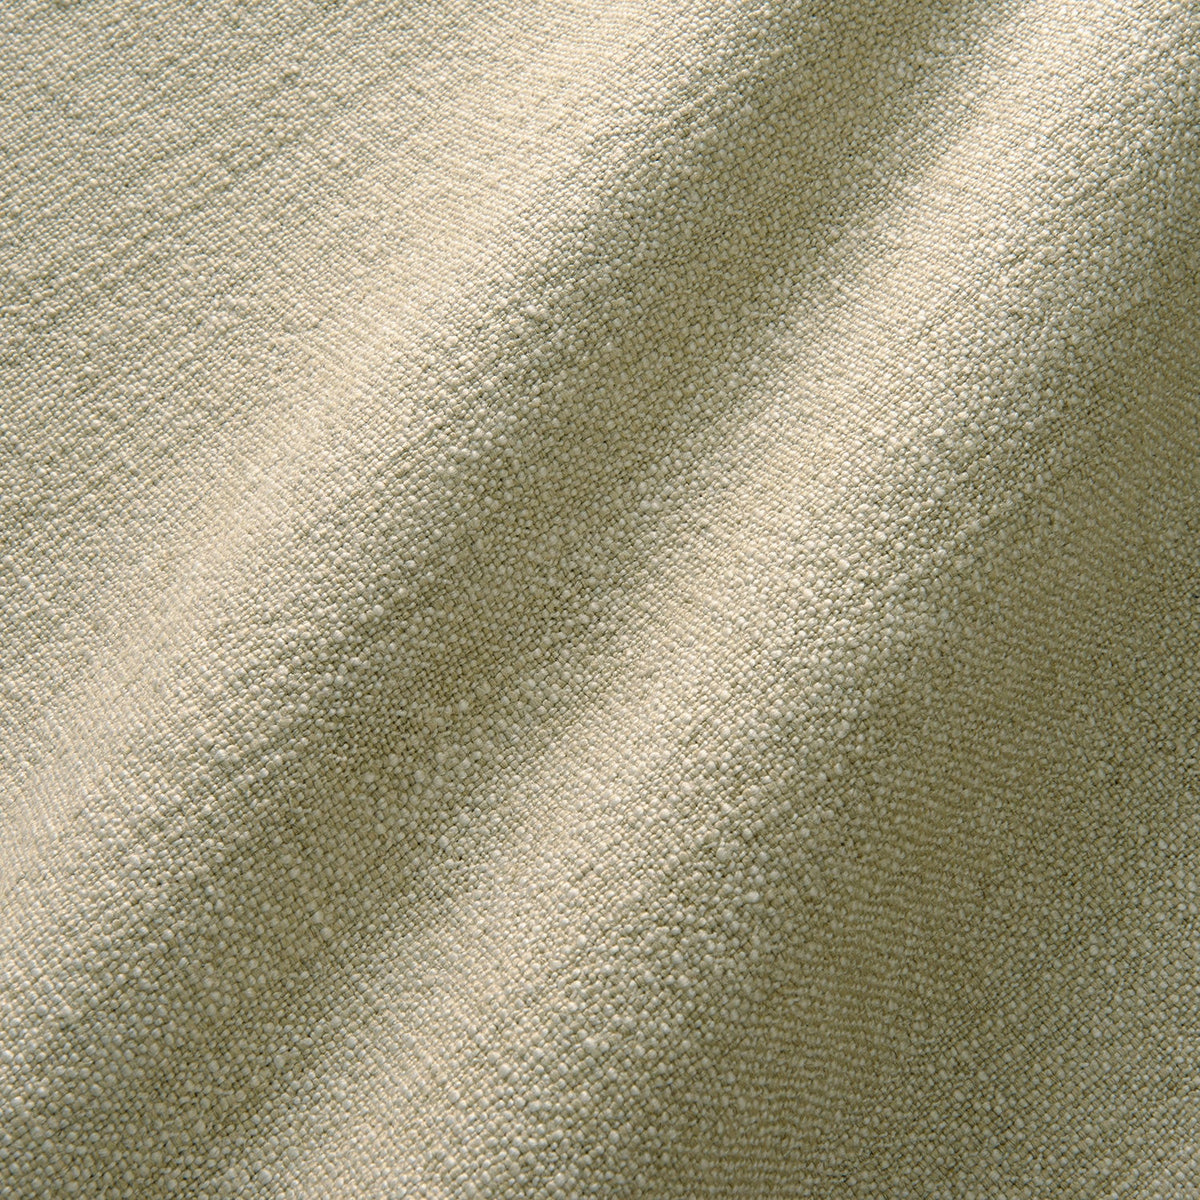 WR Coated Cotton Canvas – Nona Source